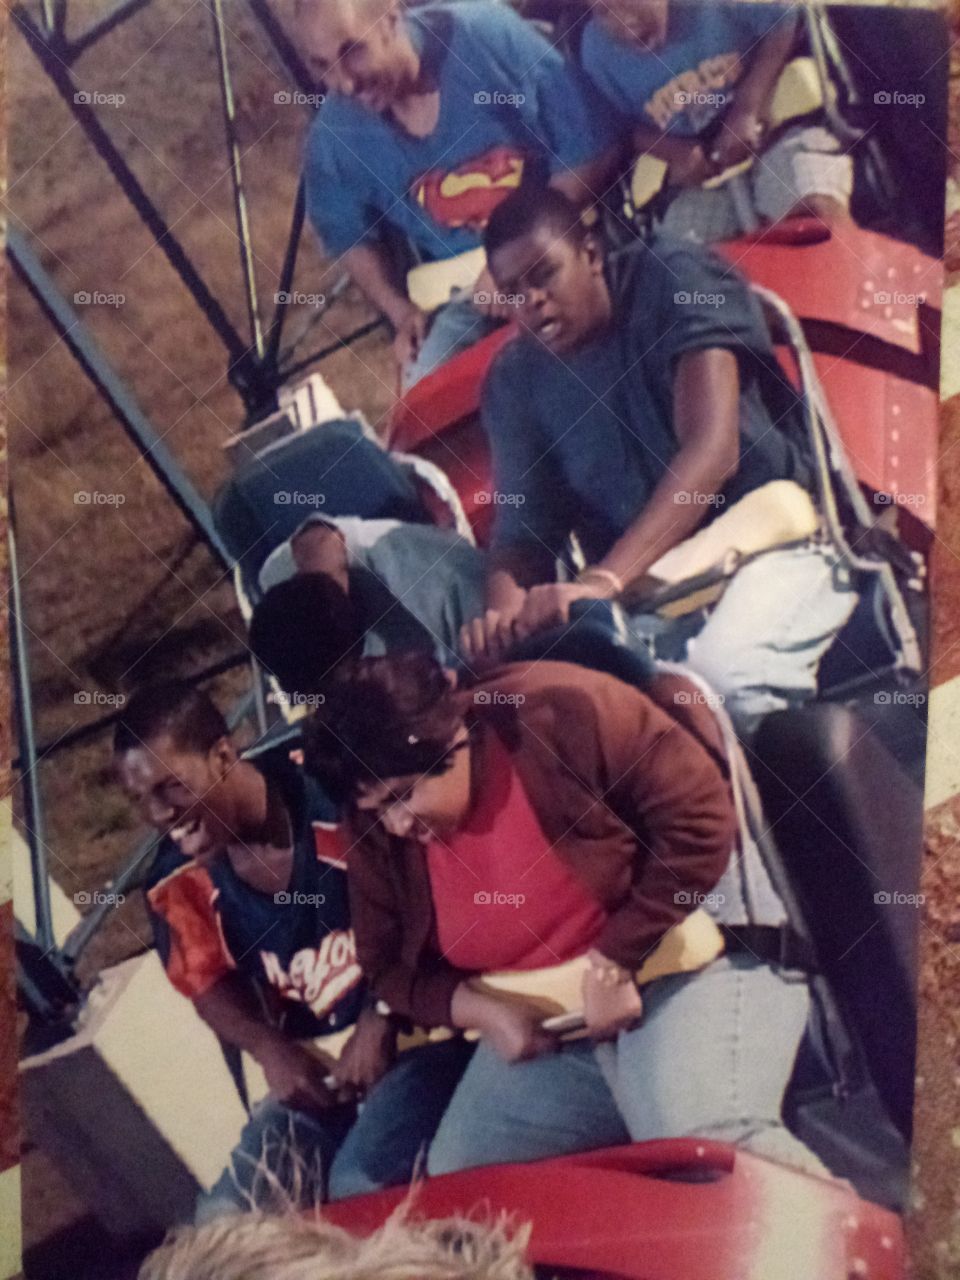 me and one of my social workers on the Superman rollercoaster